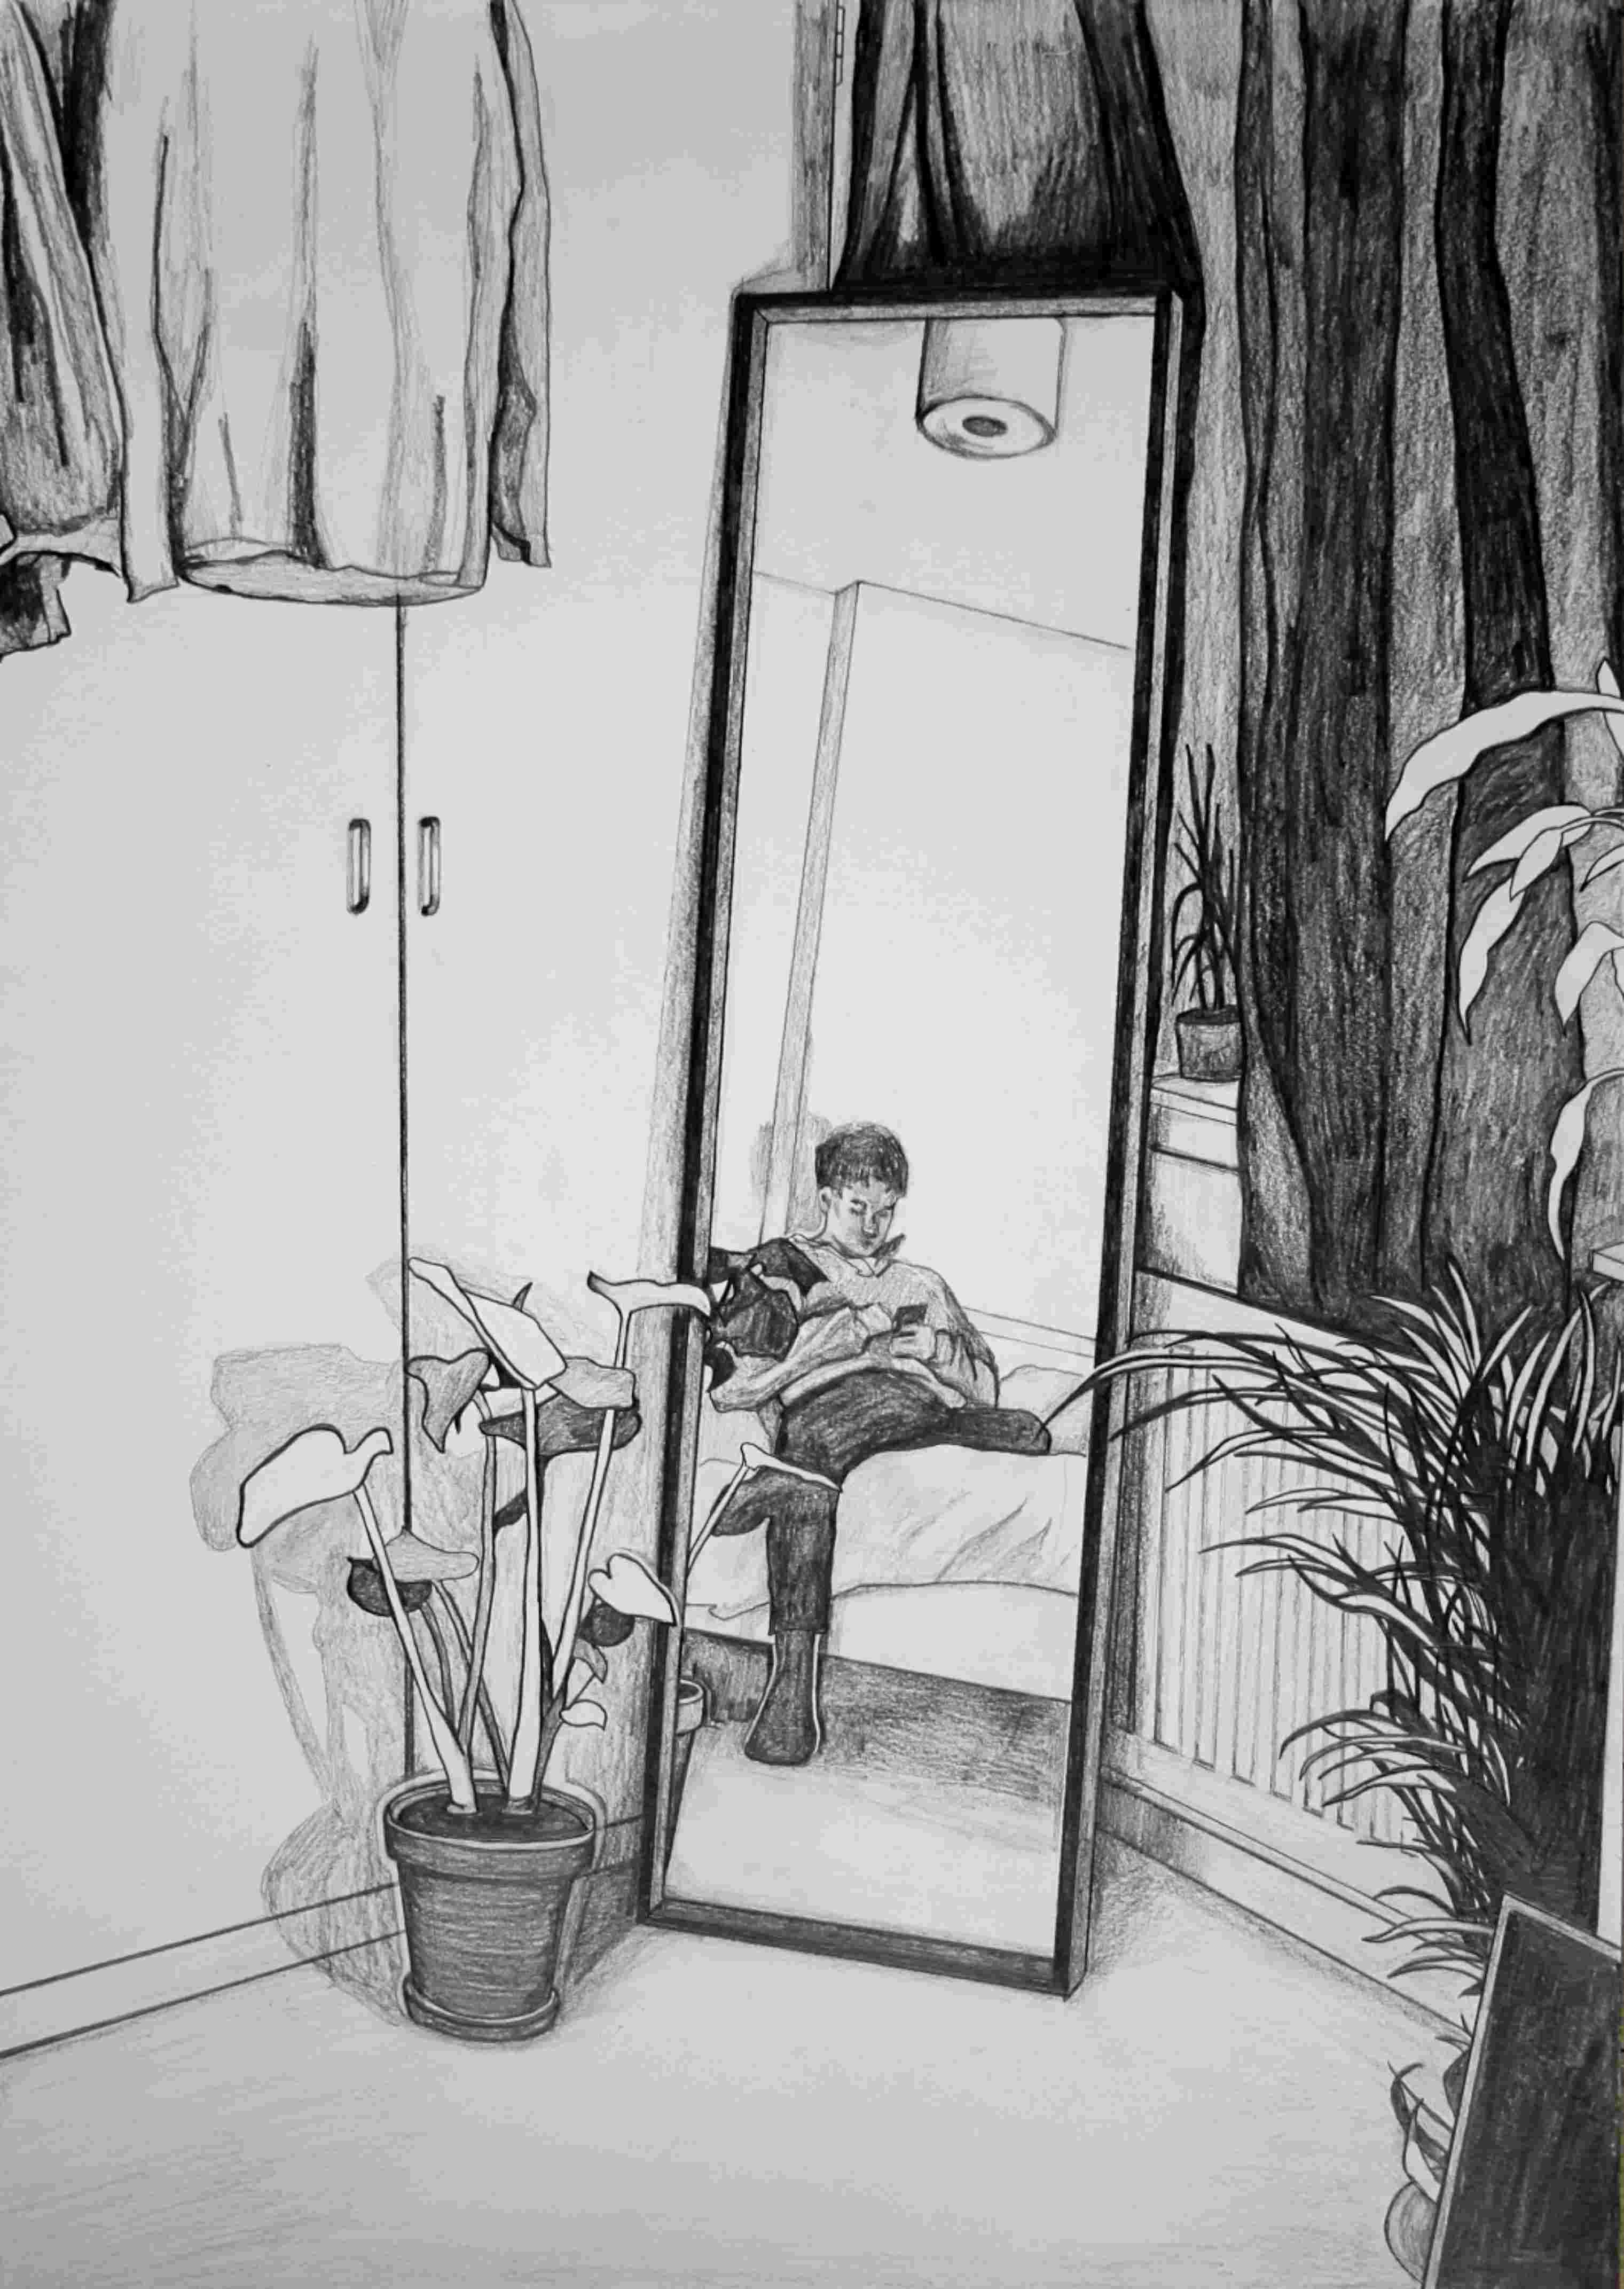 A pencil drawing of a room with plants and a figure reflected in a mirror.